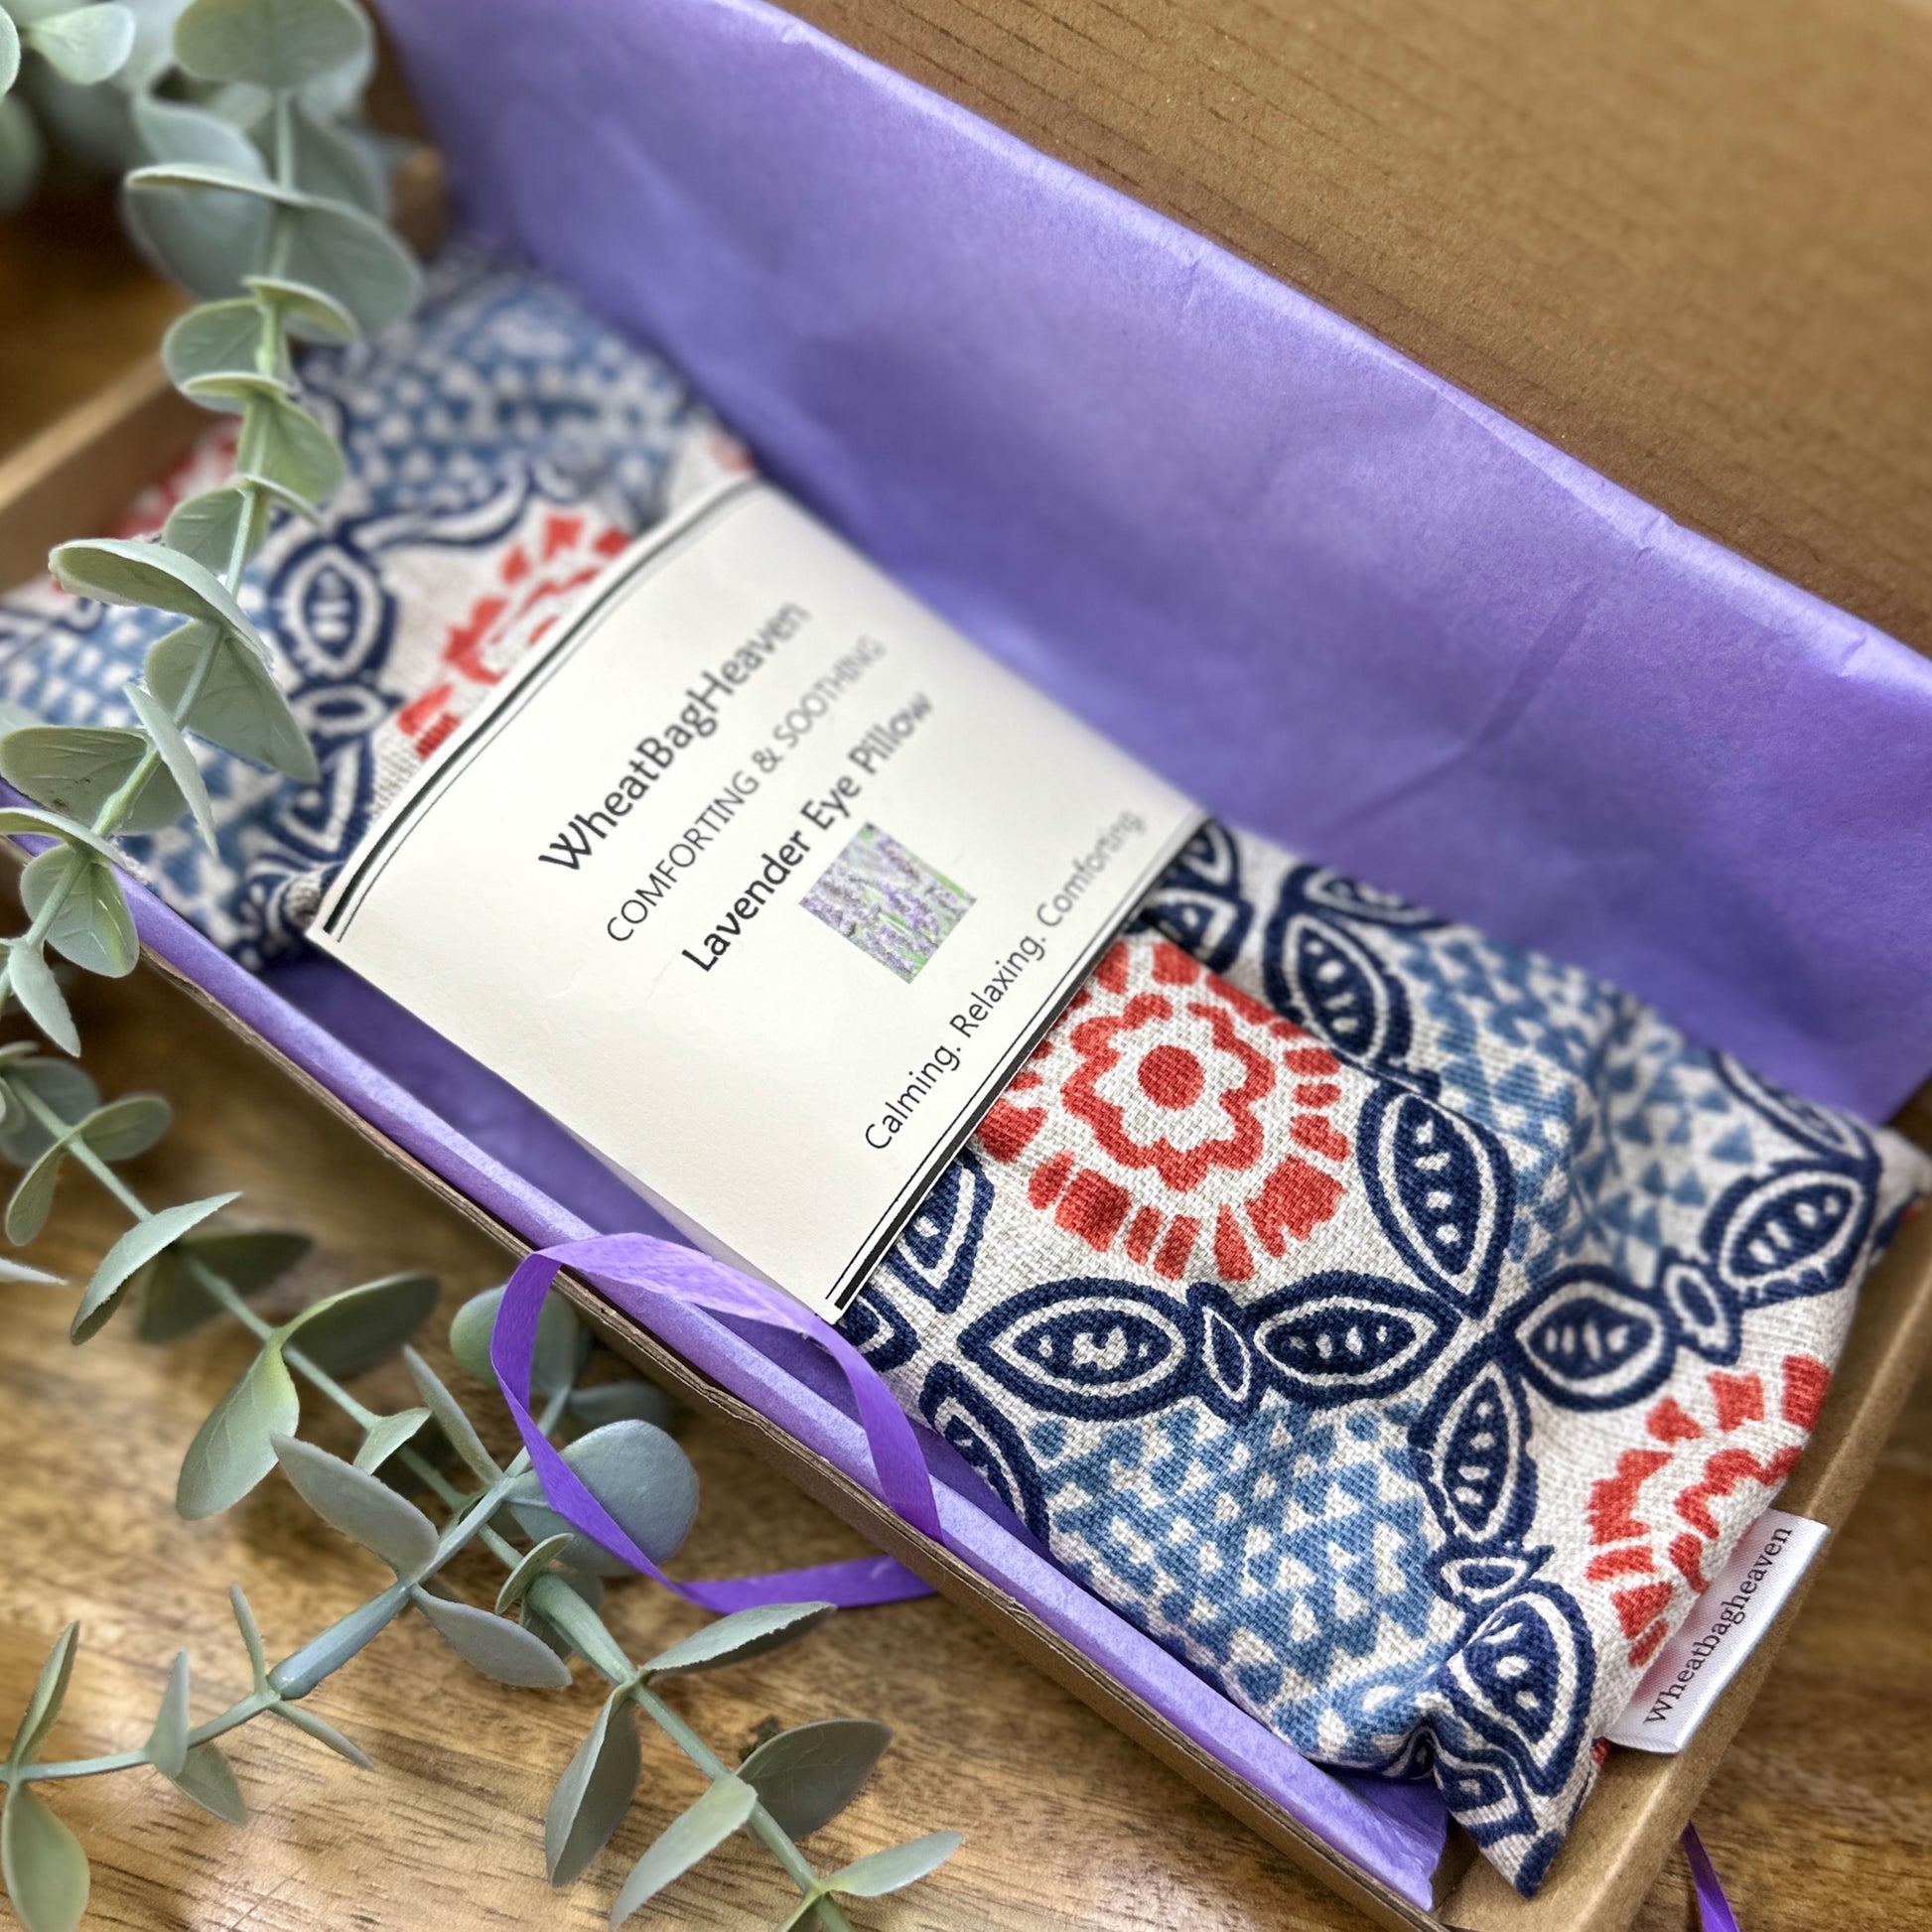 sleep mask eye pillow filled with flaxseed and English lavender aiding relaxation. Mandela cotton print wellbeing letterbox gift